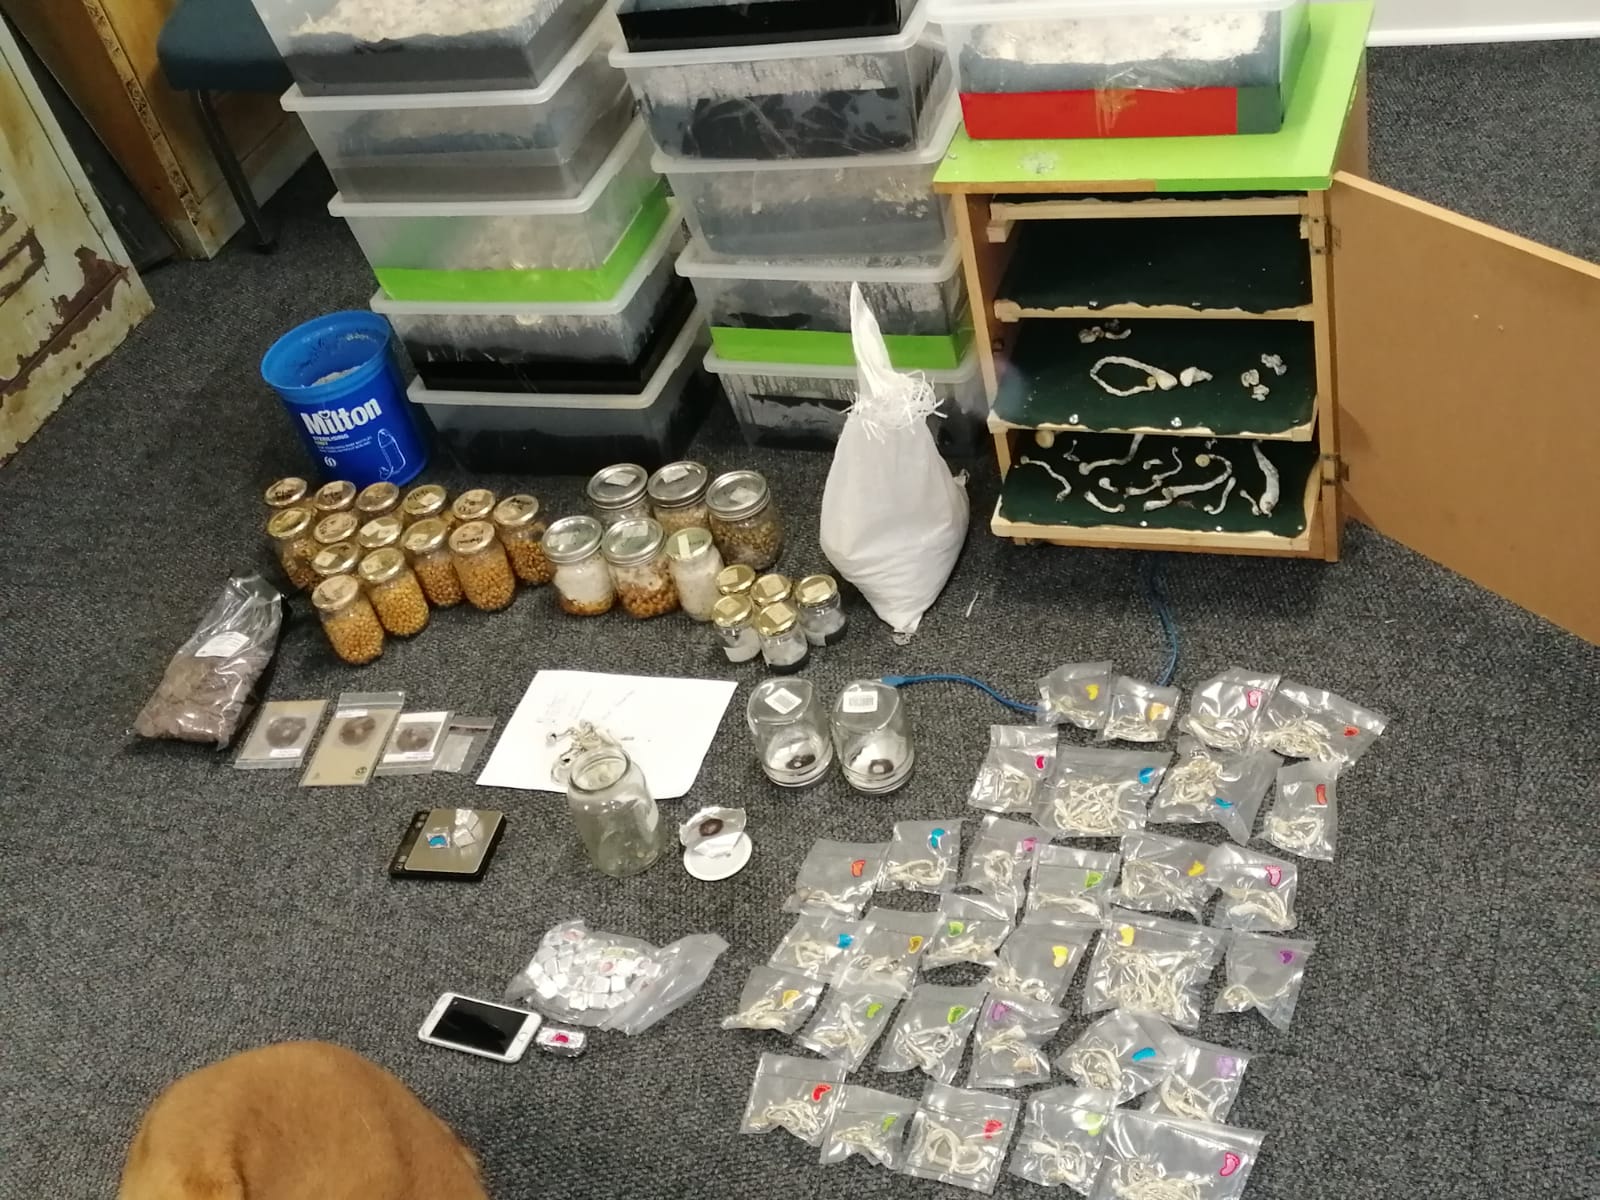 Police arrested a 36-year-old man for drugs with an estimated street value of R46 000 at a makeshift laboratory - Western Cape